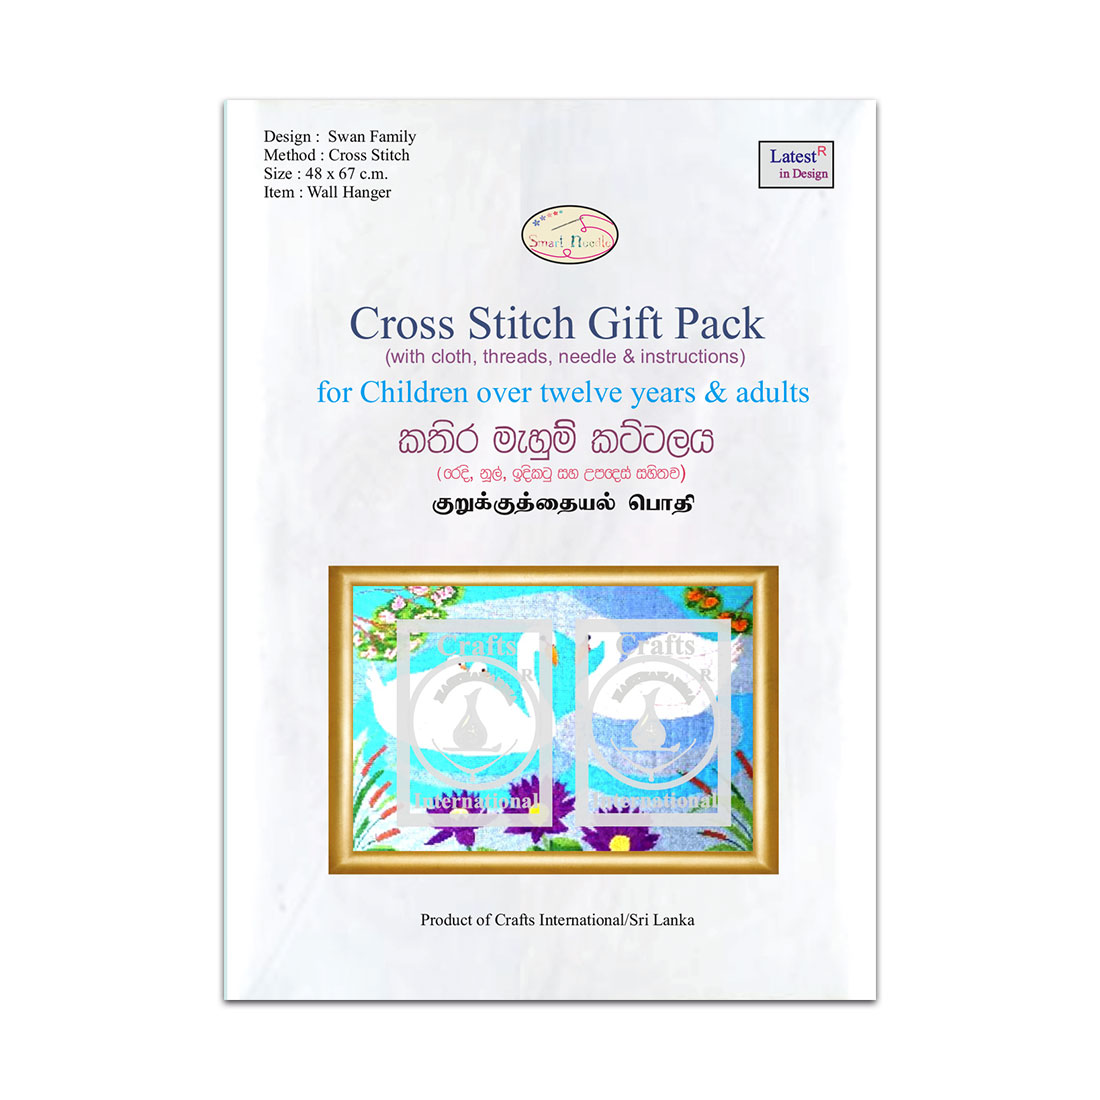 Cross Stitch Gift Pack - Swan Family